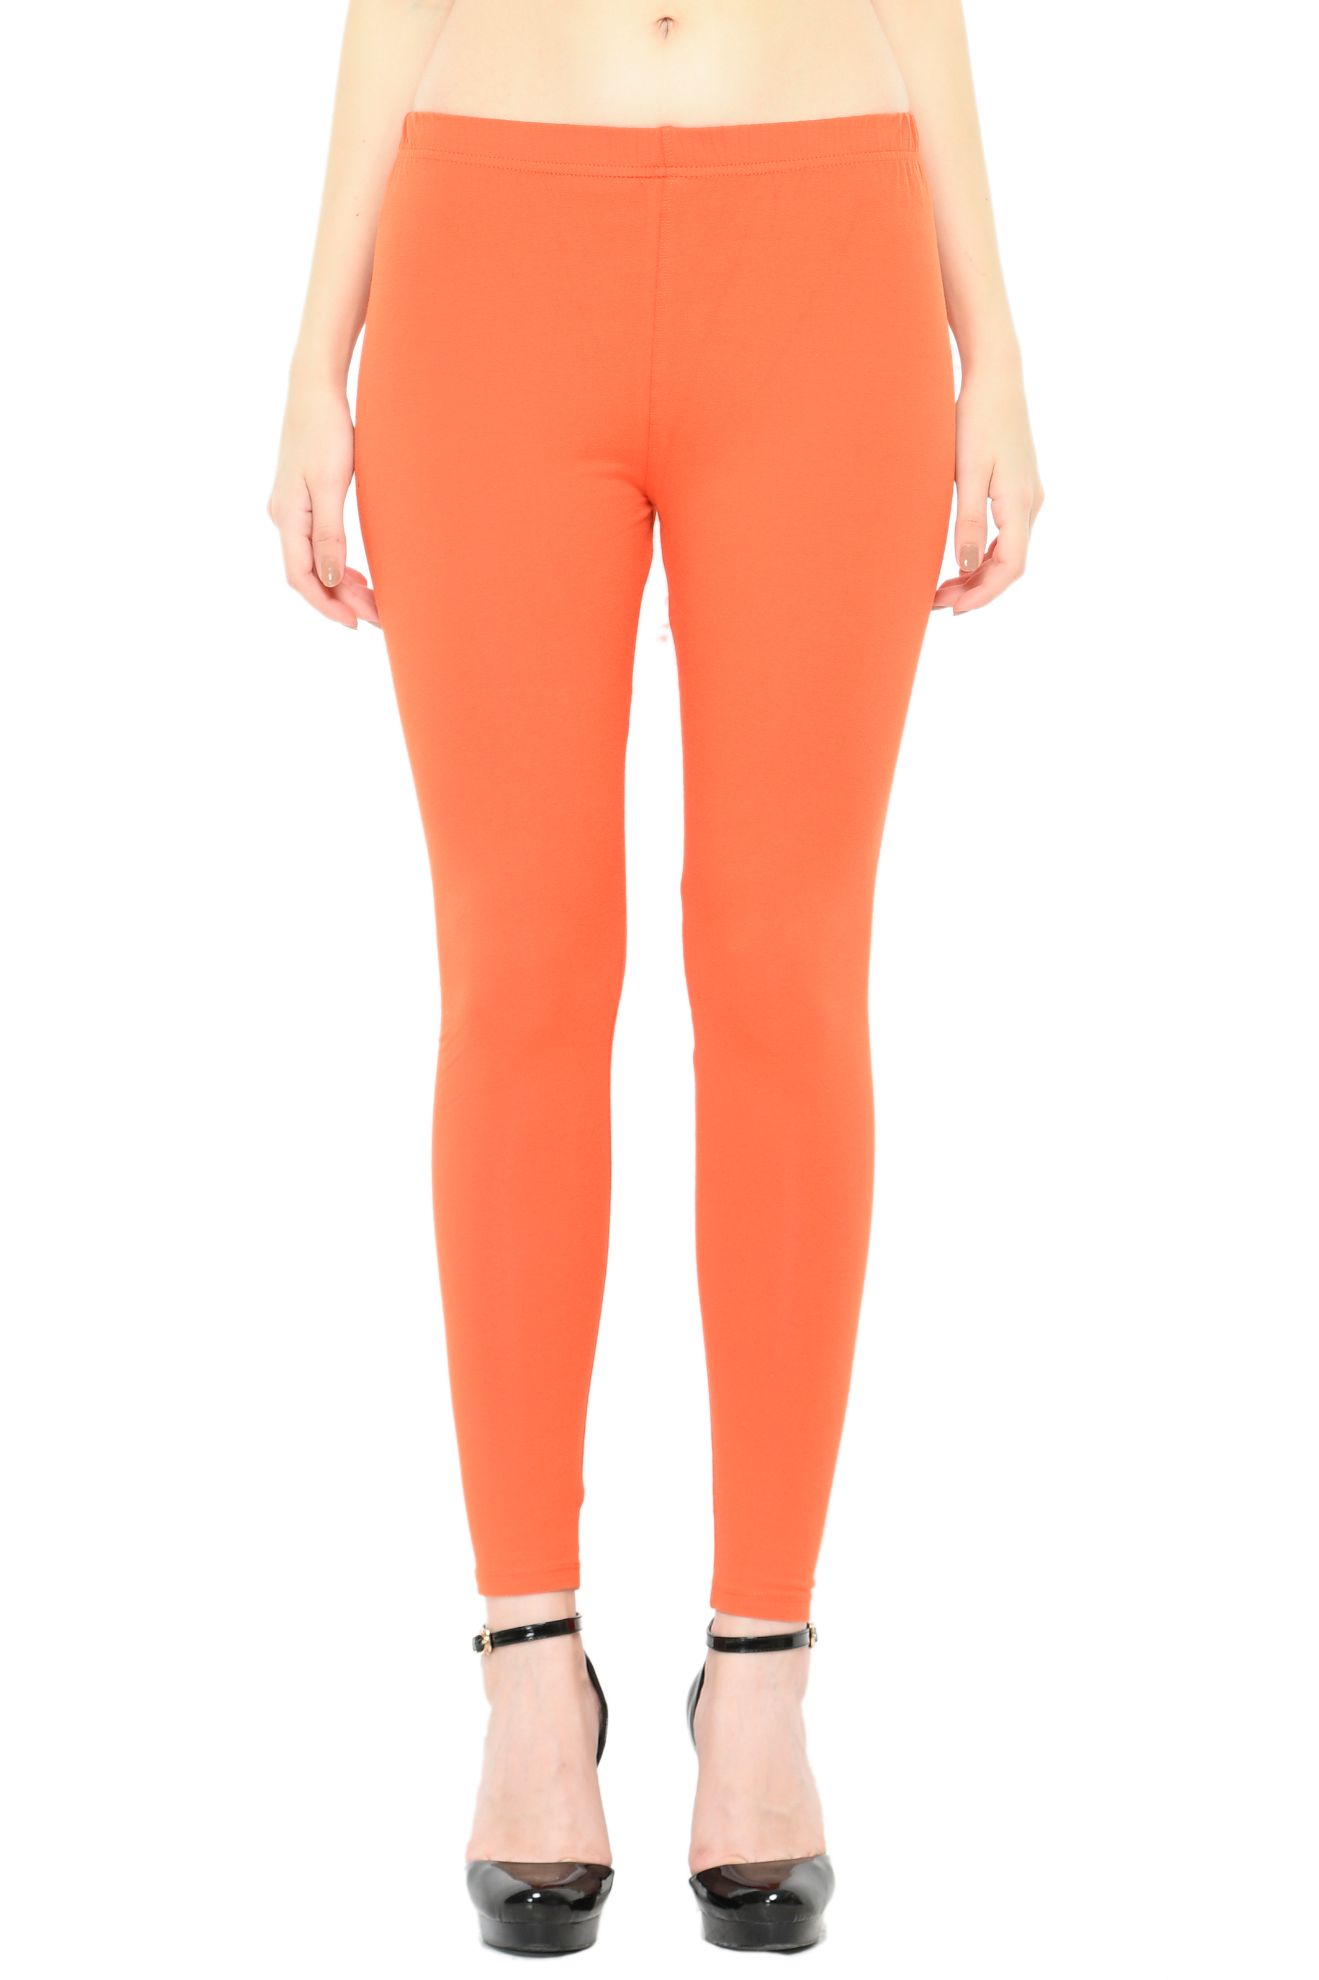 Modern Stretchable Legging with Ankle Zipper - Set of 2 @ 75% OFF Rs 617.00  Only FREE Shipping + Extra Discount - Ankle Fit Leggings, Buy Ankle Fit Leggings  Online, Printed Leggings,